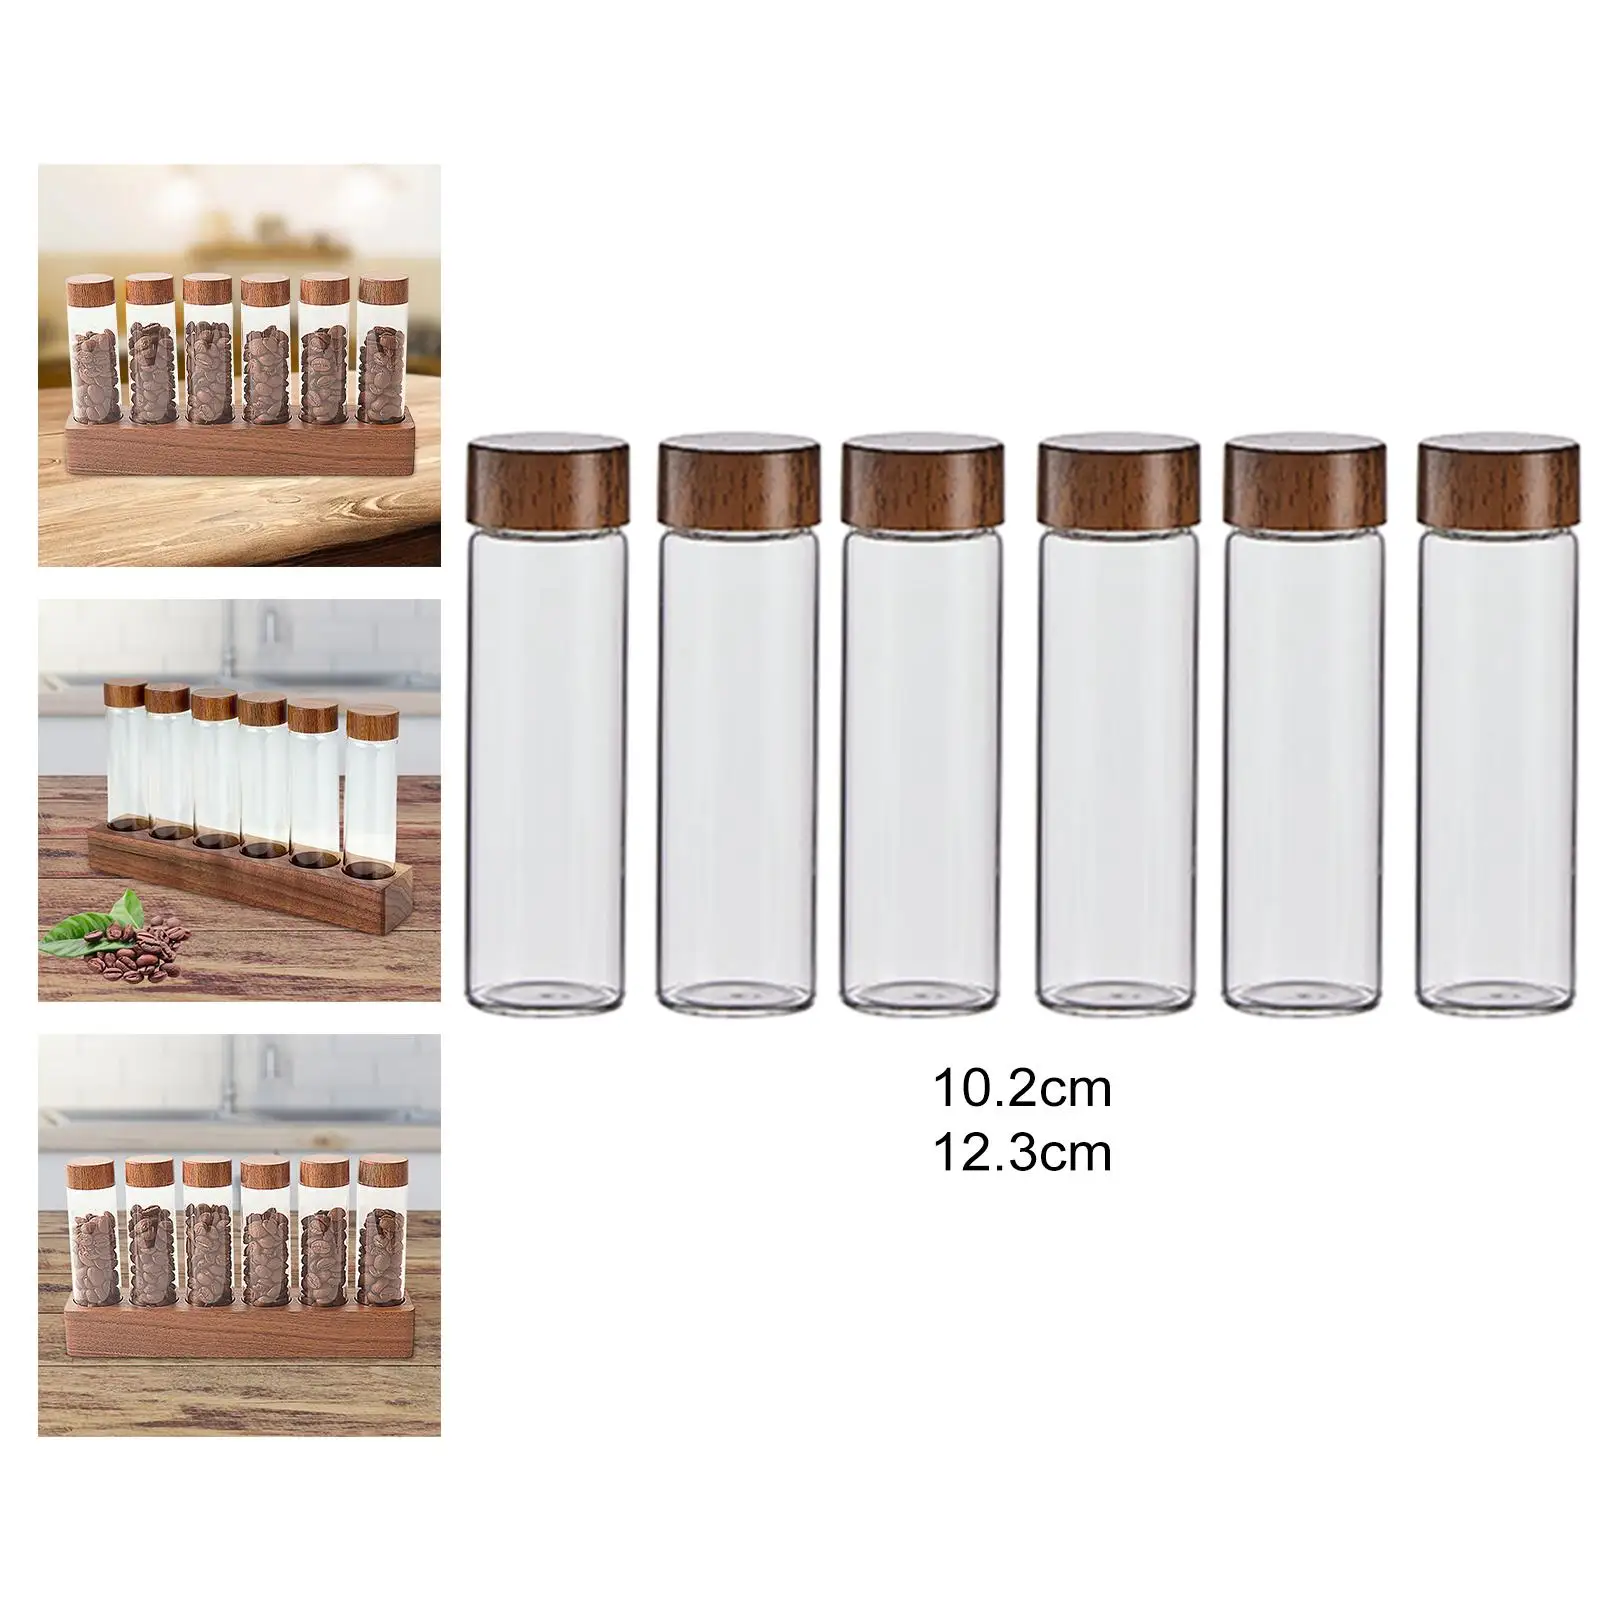 6x Coffee Party Decoration Tea Sugar Canister Coffee Bean Dispenser for Countertop Bar Coffee Shop Cafe Kitchen